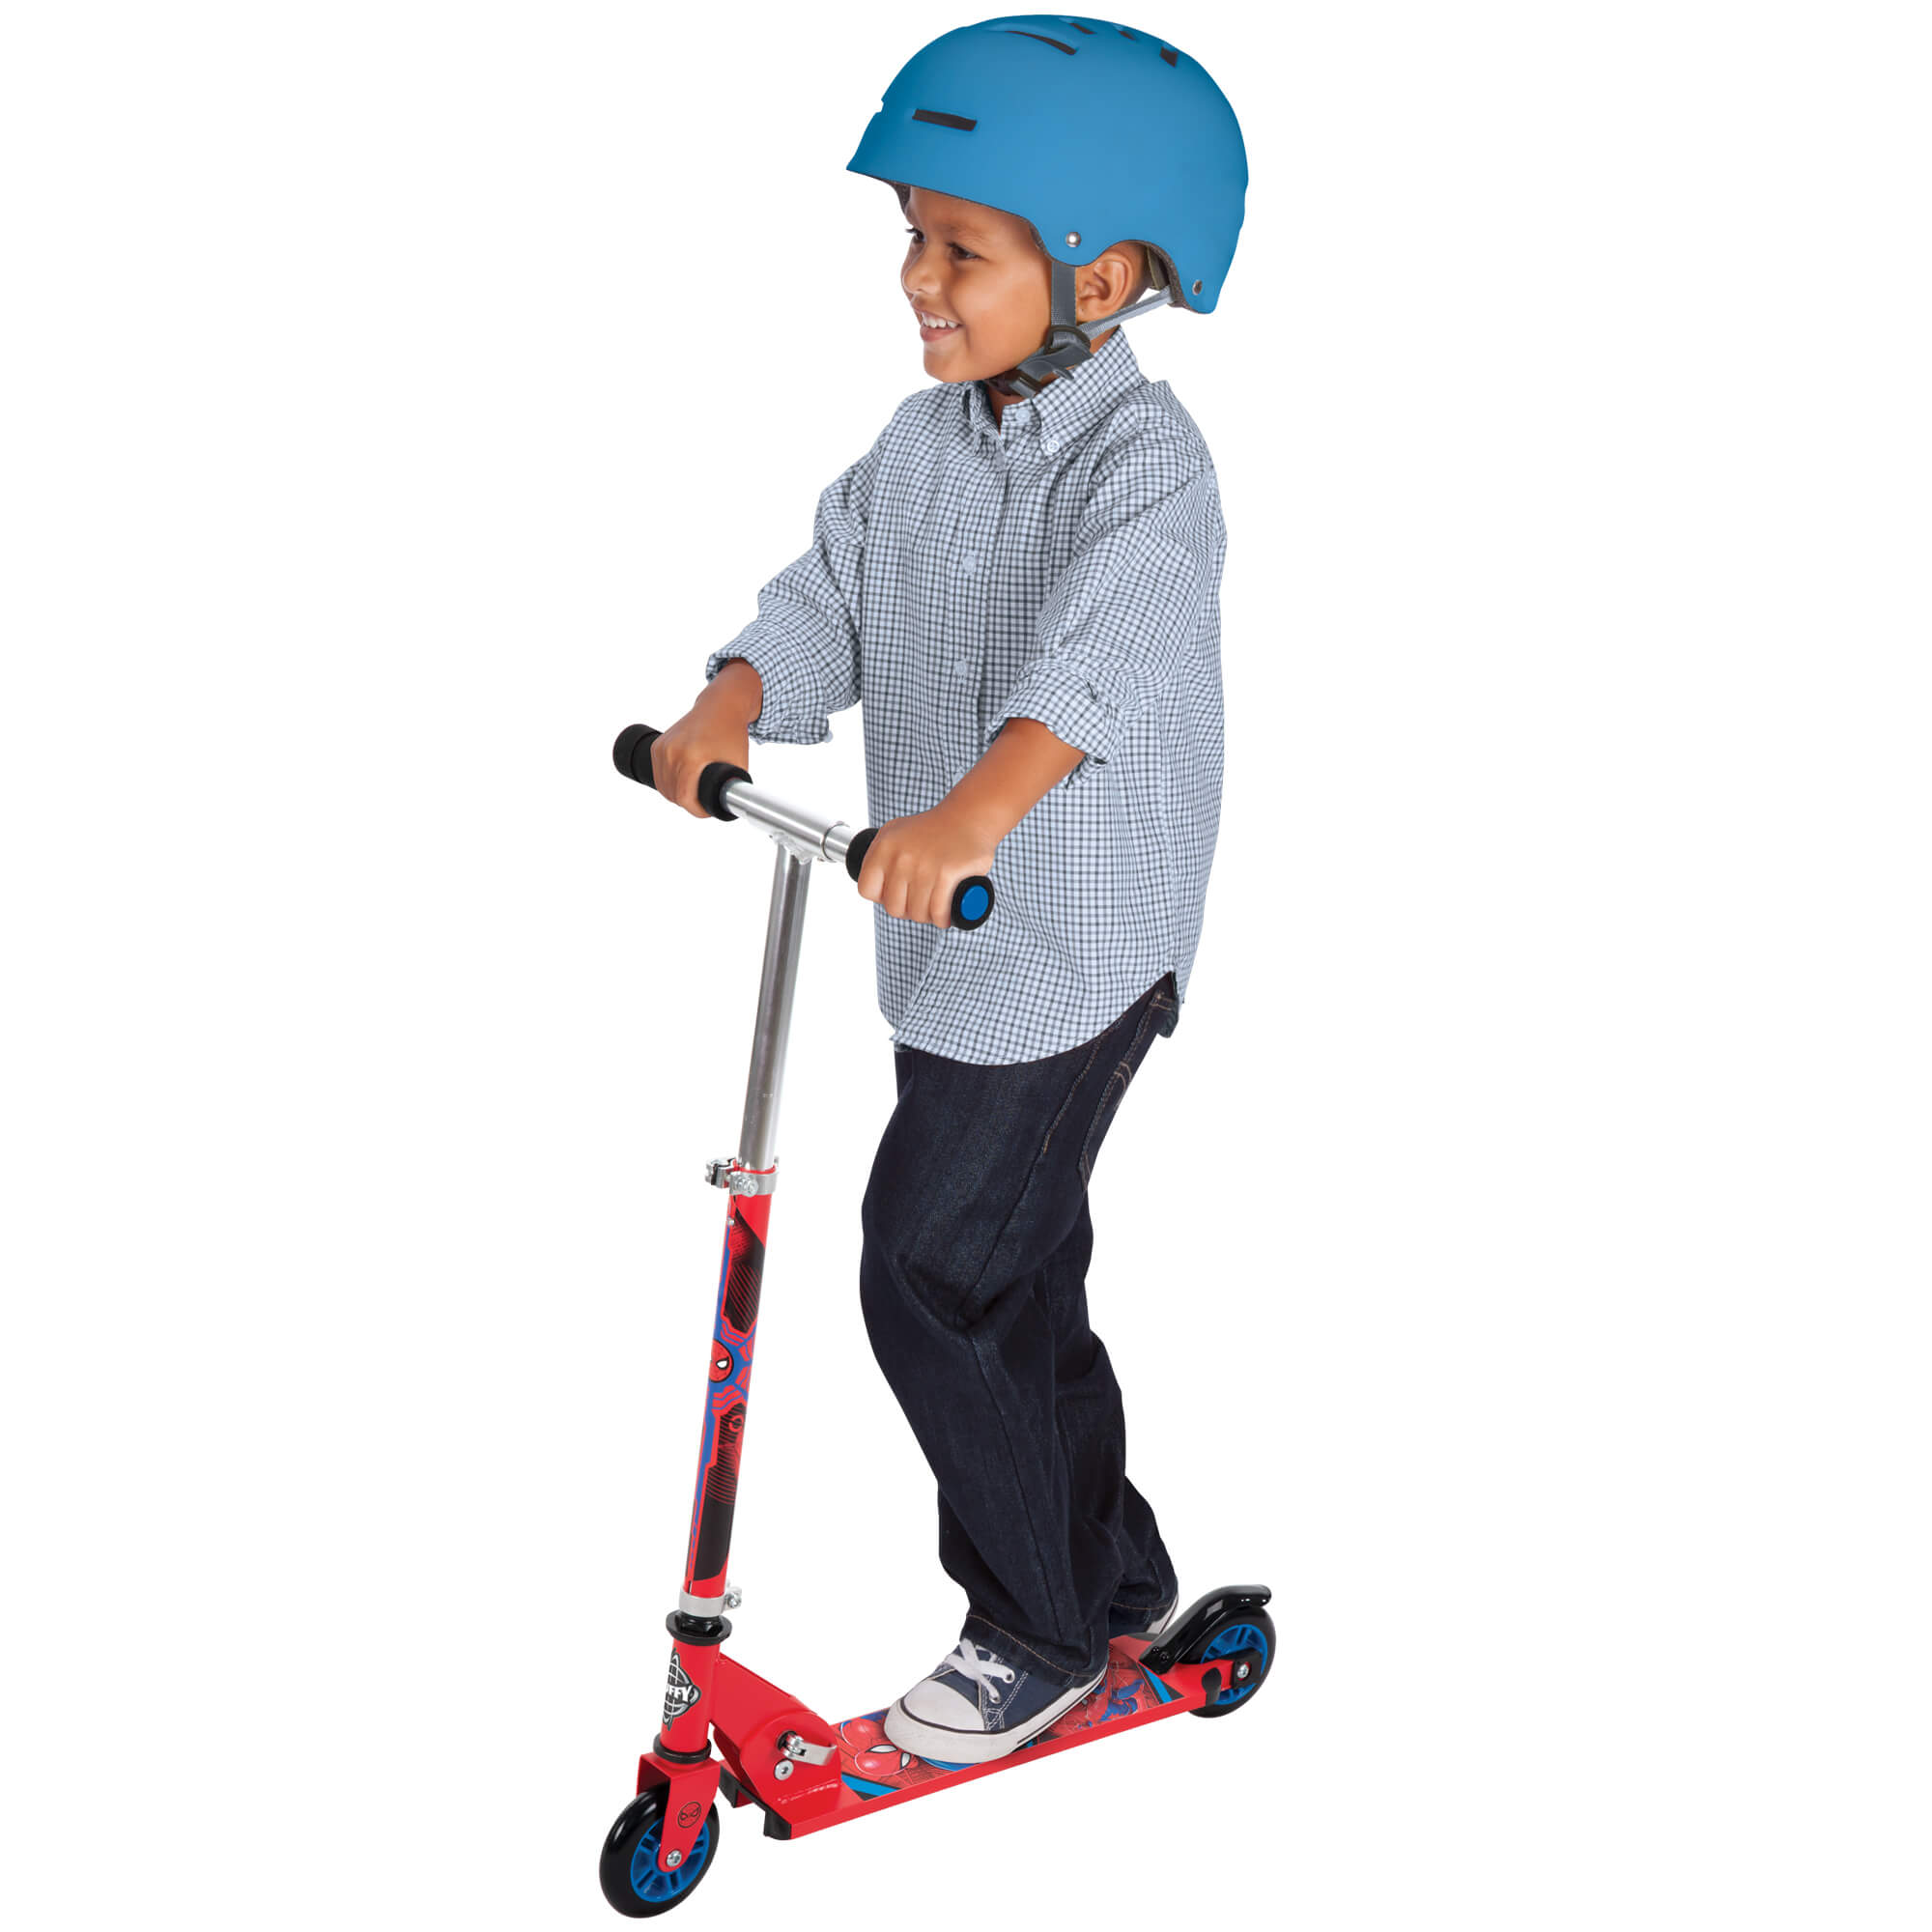 Marvel Spider-Man Inline Folding Kick Scooter for Boys, by Huffy - image 1 of 9